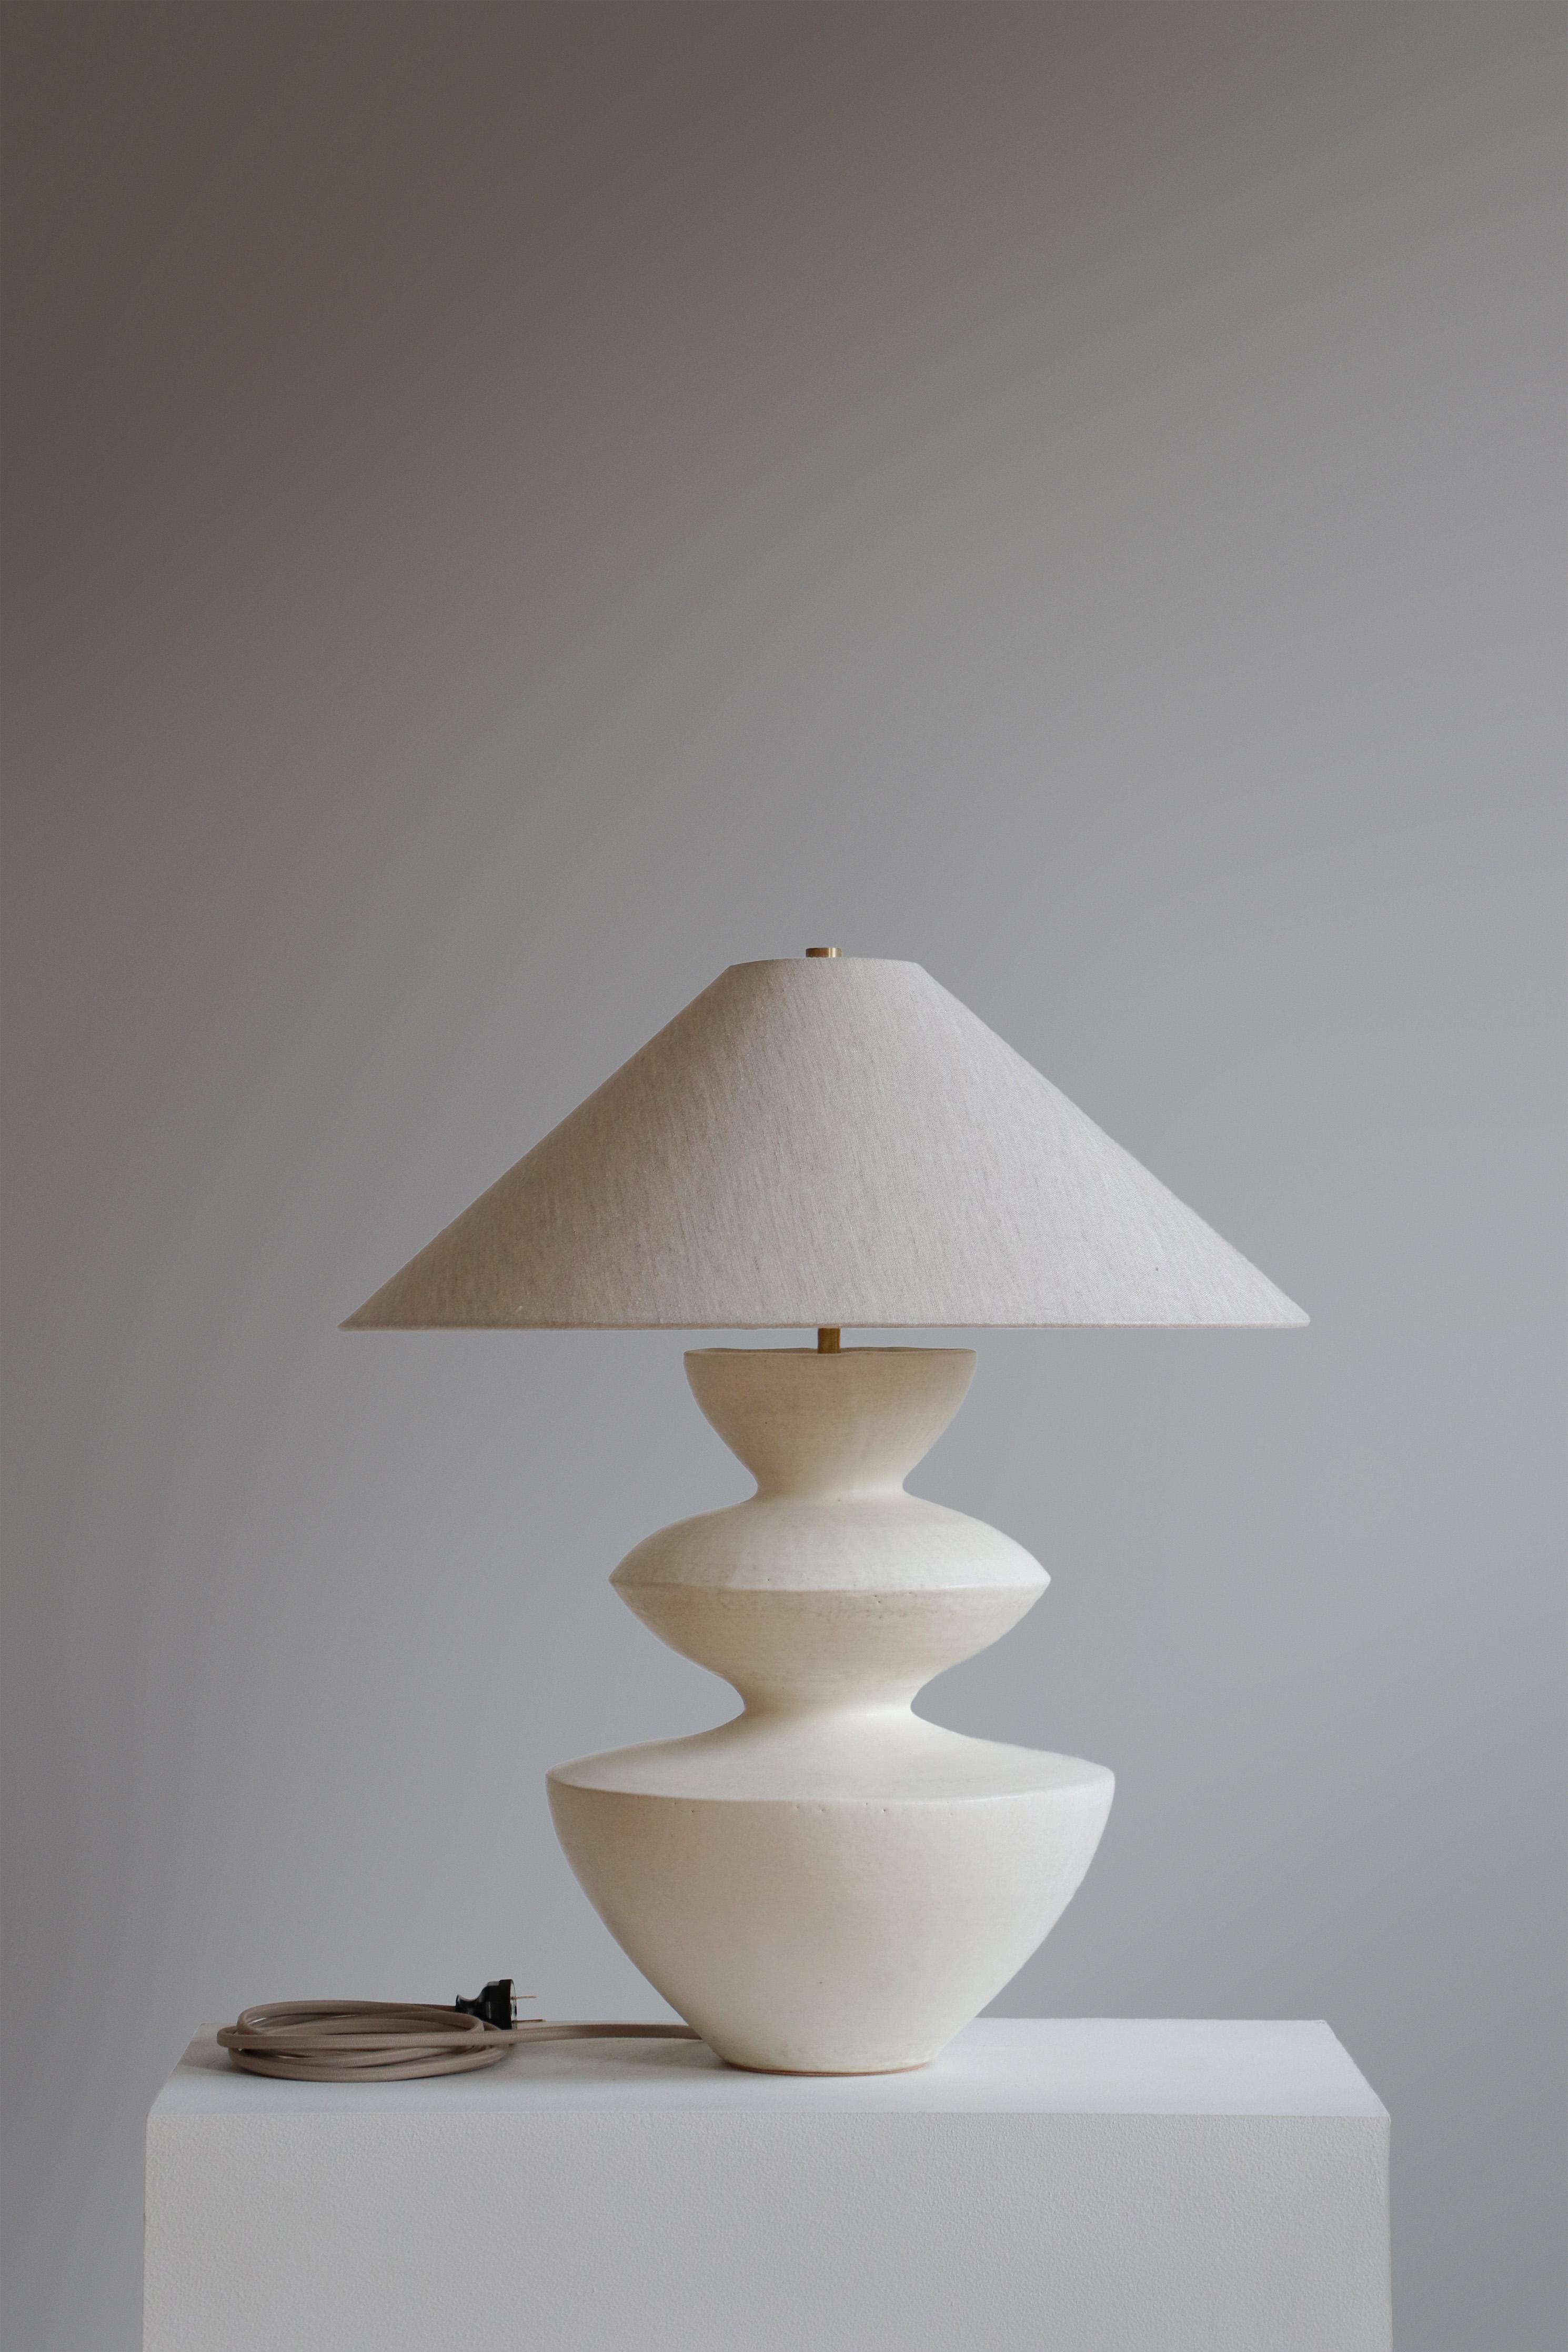 Stone Janus Table Lamp by Danny Kaplan Studio
Dimensions: ⌀ 51 x H 59 cm
Materials: Glazed Ceramic, Unfinished Brass, Linen

This item is handmade, and may exhibit variability within the same piece. We do our best to maintain a consistent product,